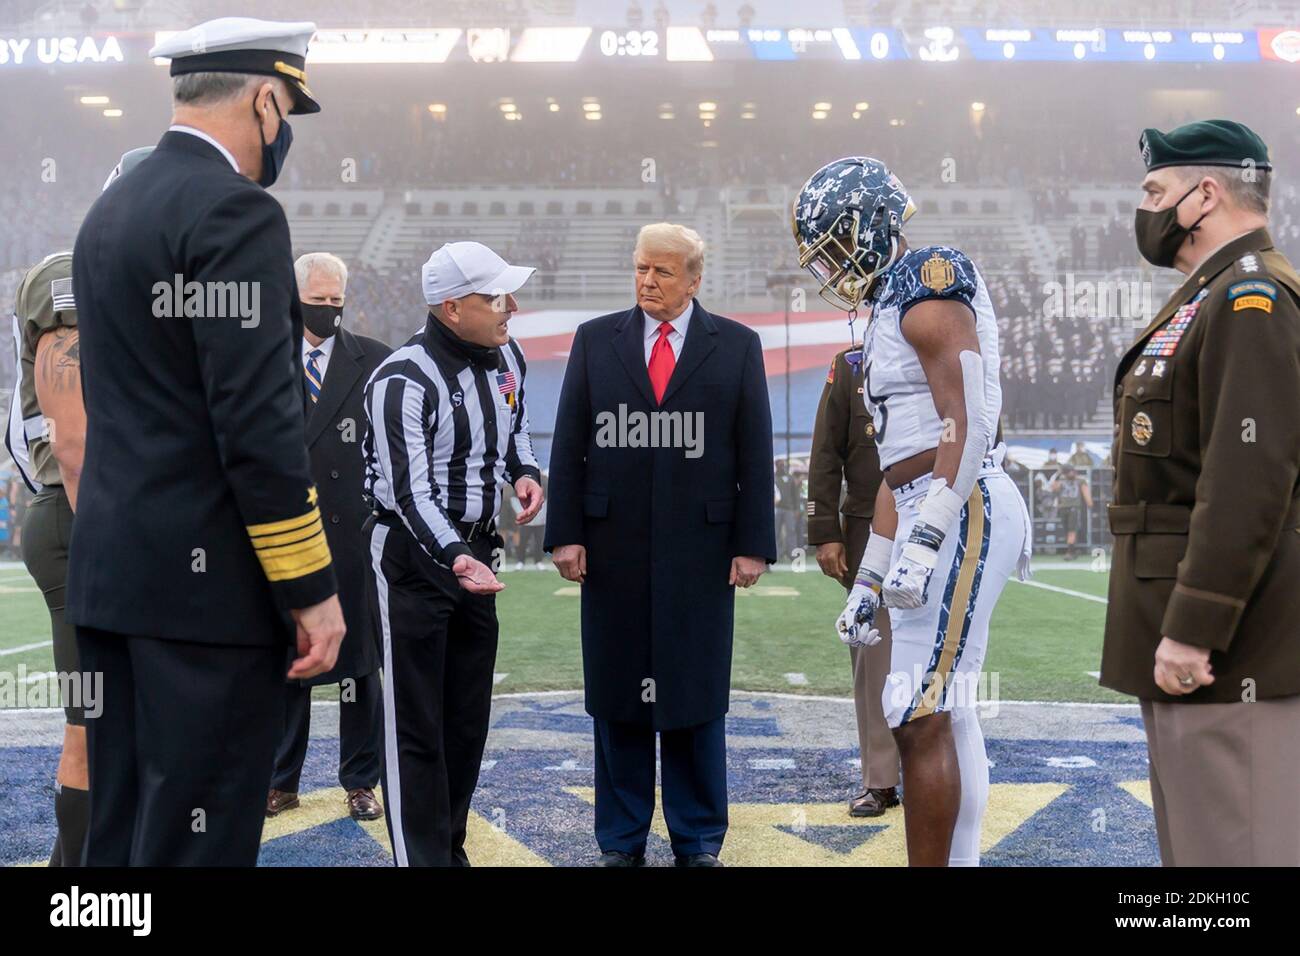 U.S. President Donald Trump takes part in the coin toss at the start the 121st Army-Navy football game at Michie Stadium December 12, 2019 in West Point, New York. The Army Black Knights shutout the Navy Midshipmen 15-0. Stock Photo